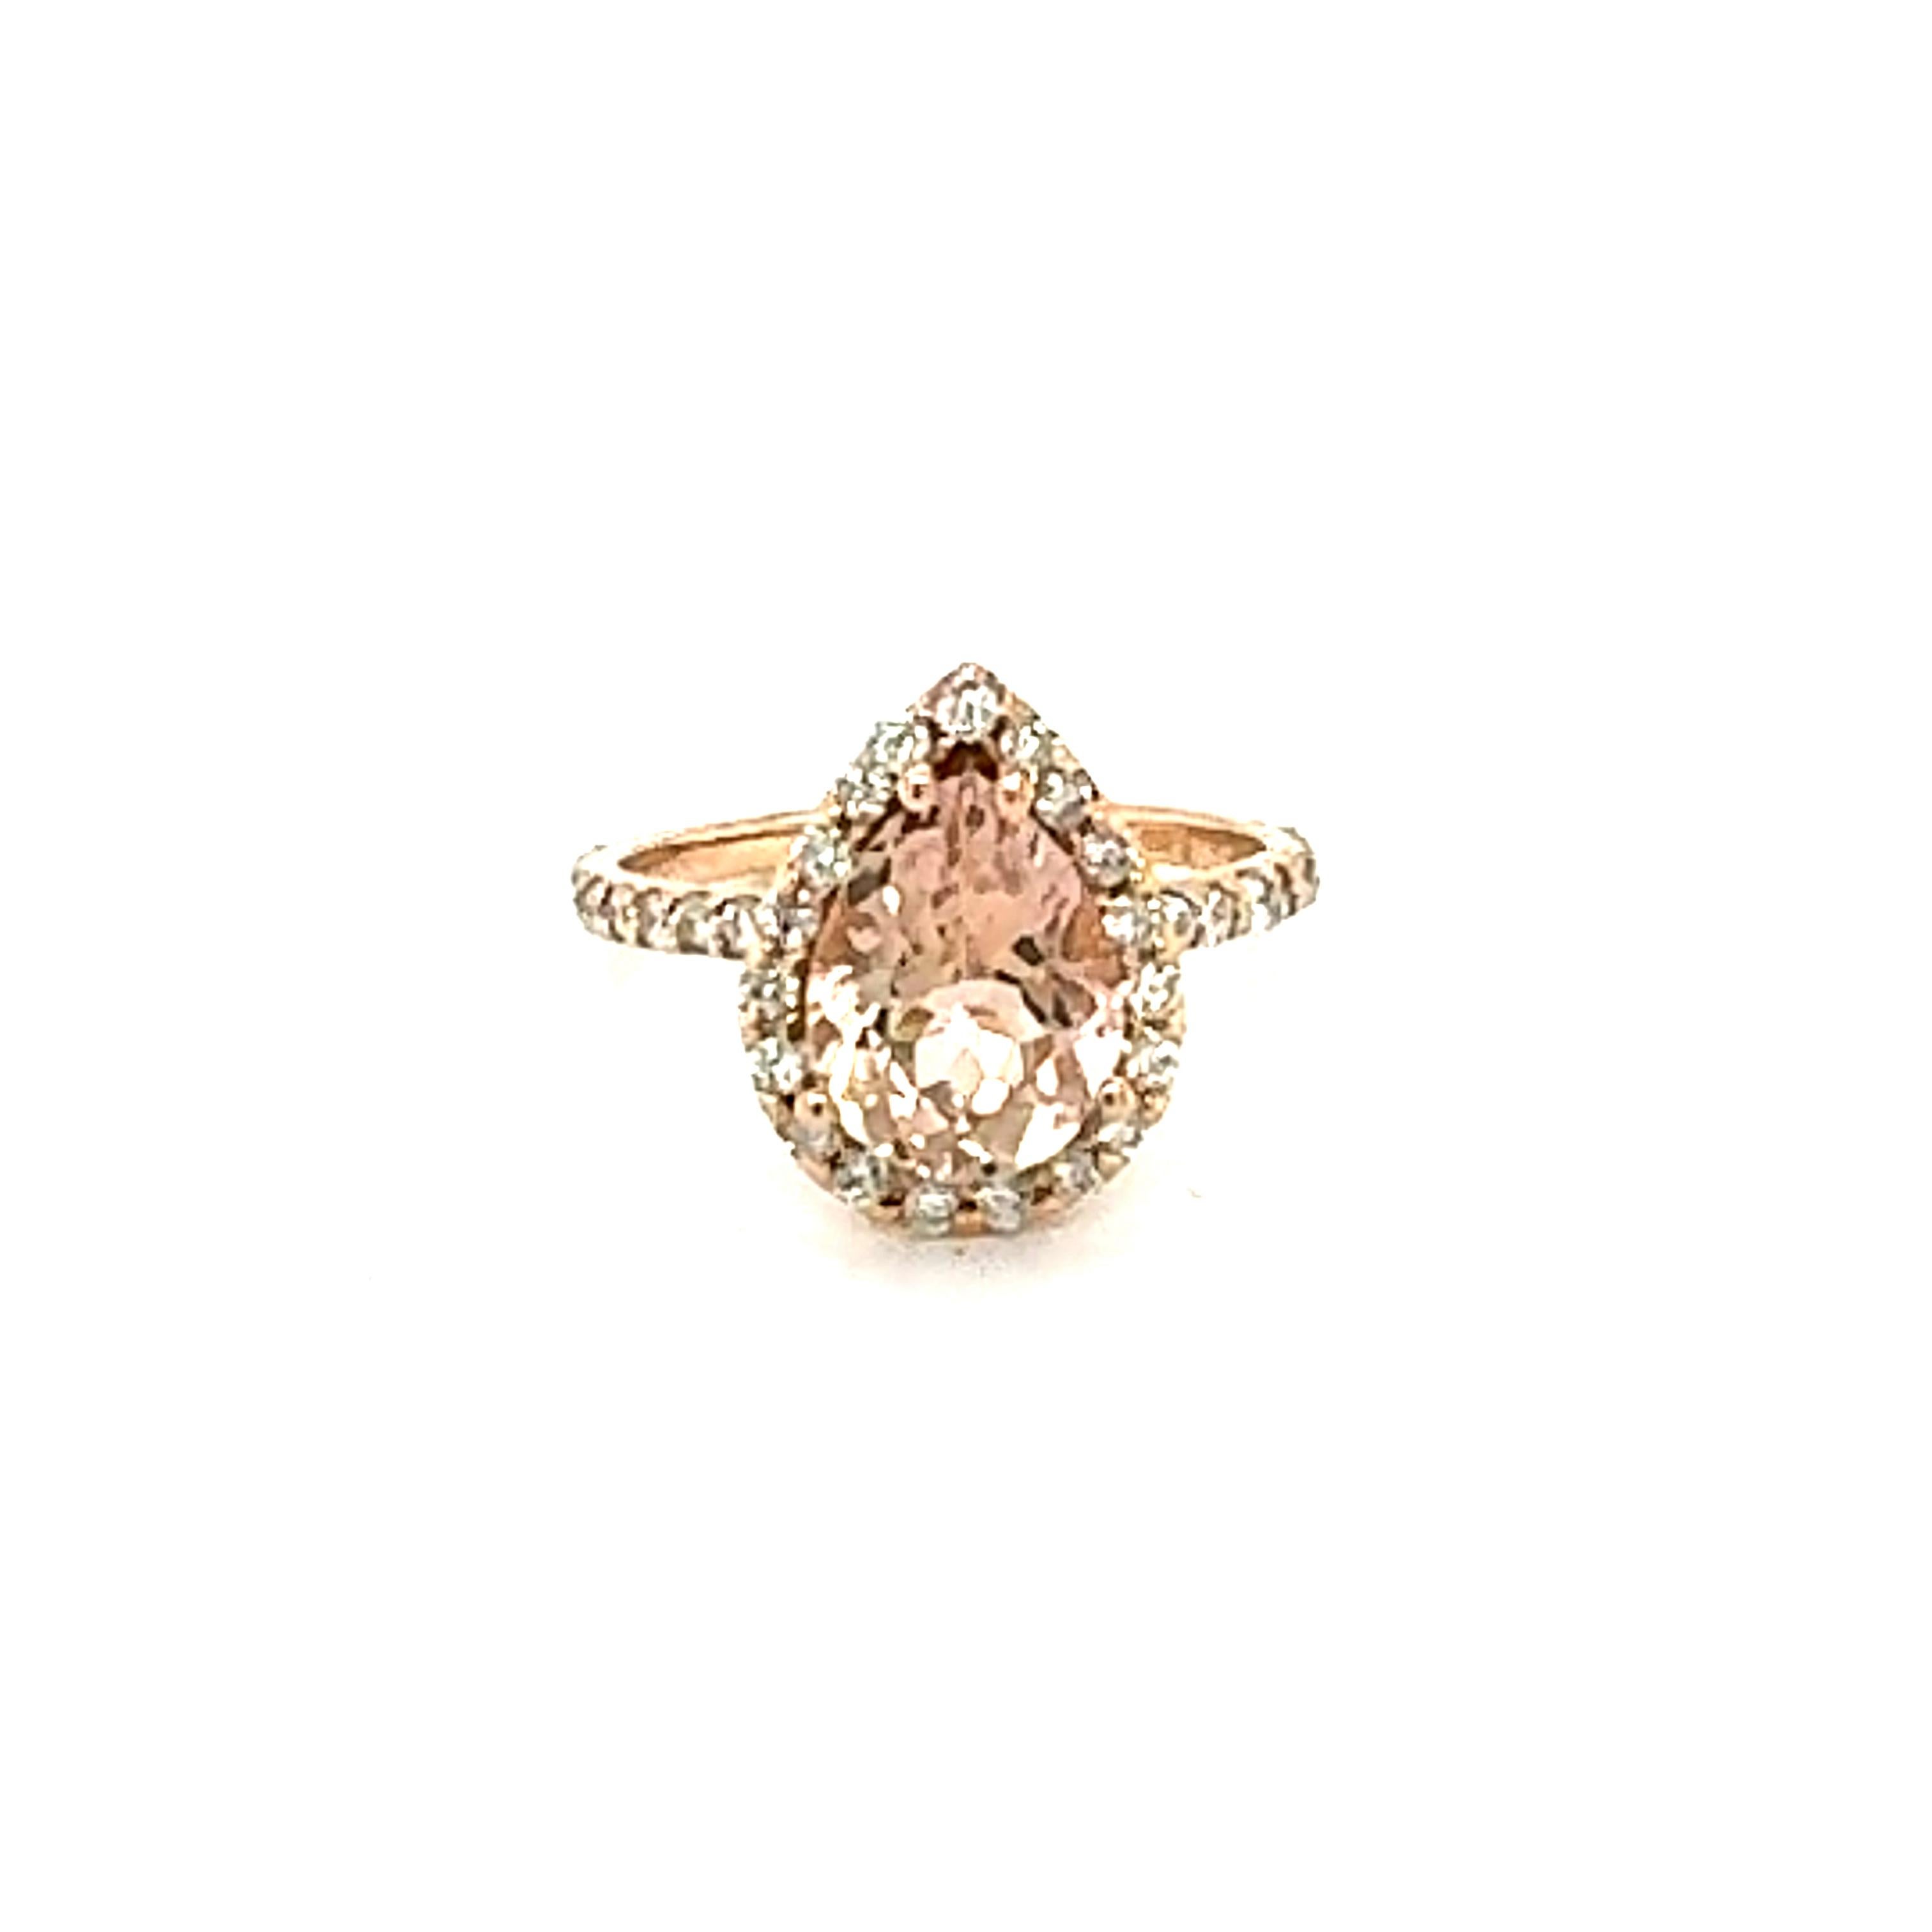 3.24 Carat Morganite Diamond Rose Gold Engagement Ring

This gorgeous and classy Morganite Ring has a 2.61 Carat Pear Cut Morganite as its center and is surrounded by a halo of 39 Round Cut Diamonds that weigh 0.63 carats. The clarity and color of